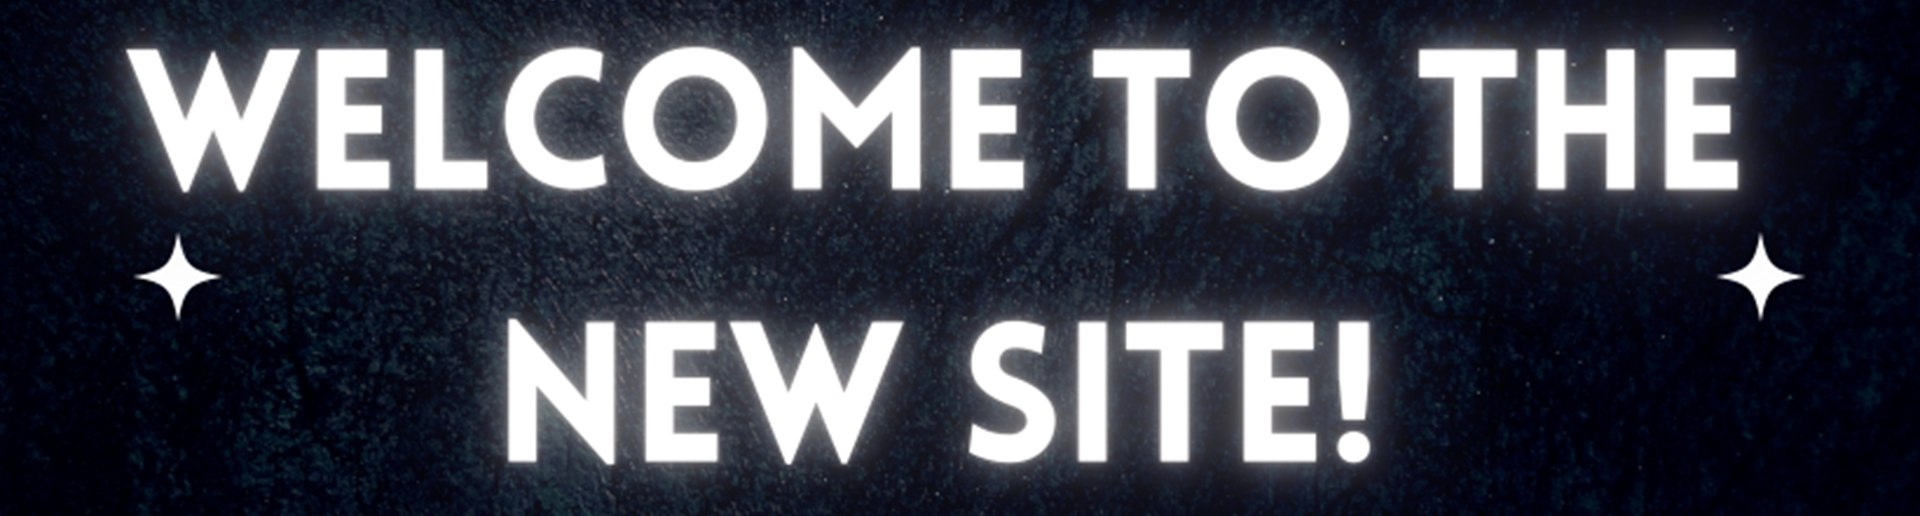 Welcome to the New Site!